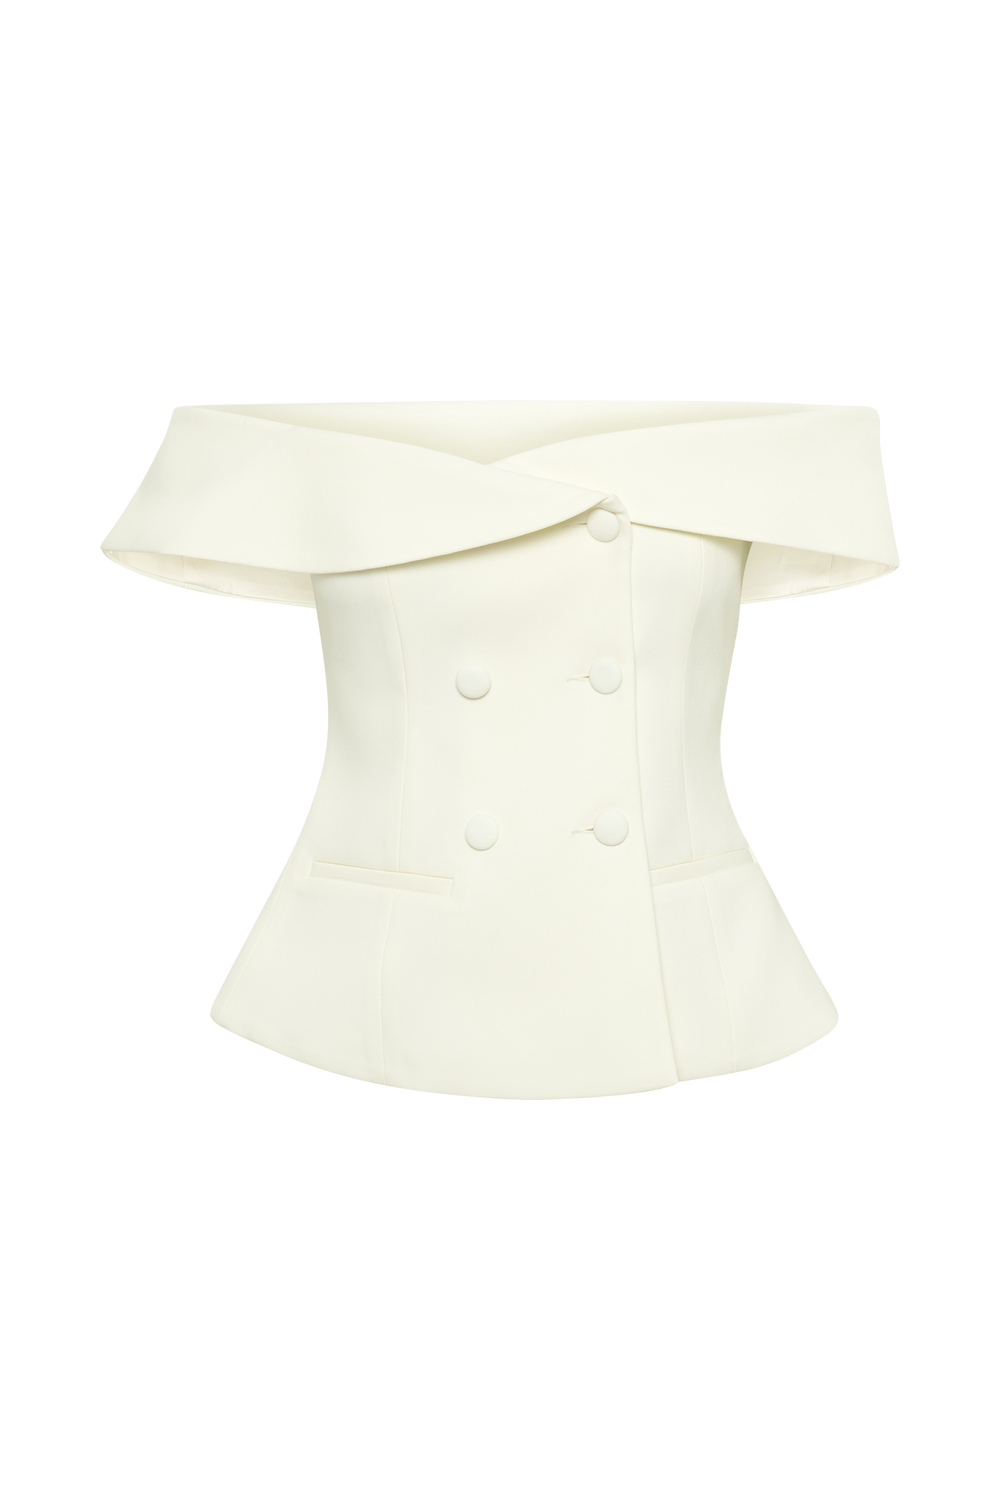 Krista Strapless Suiting Top - Ivory